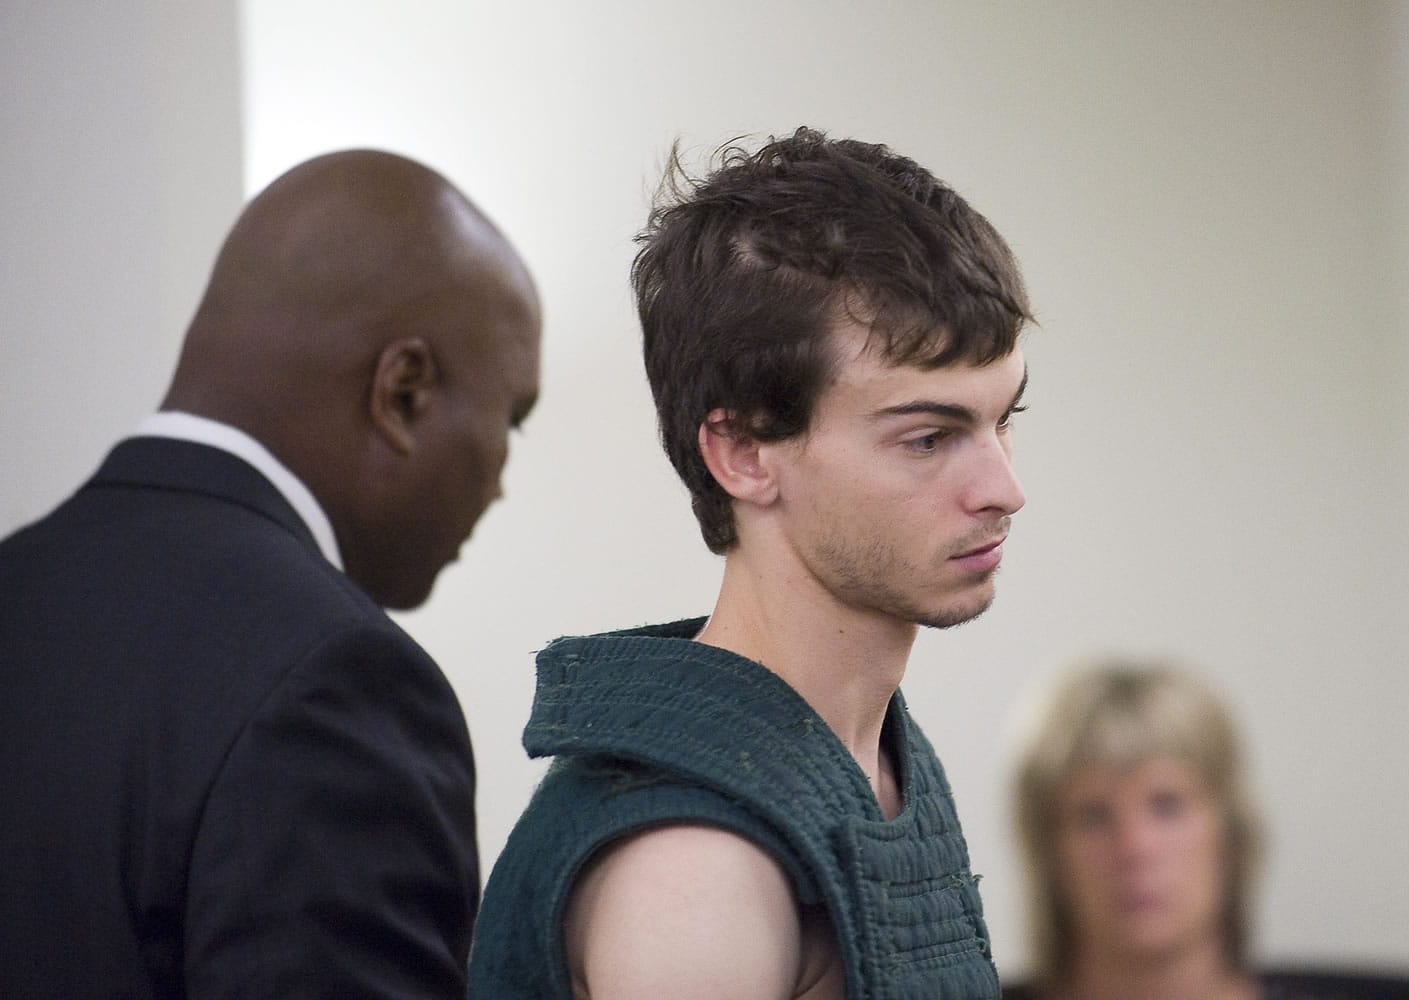 Tyler Peabody, 21, of Woodland pleaded guilty Friday to vehicular homicide and vehicular assault in connection with a traffic death in August of 76-year-old Roy Thorp. The impact also injured Thorp's passenger and Peabody's passenger.